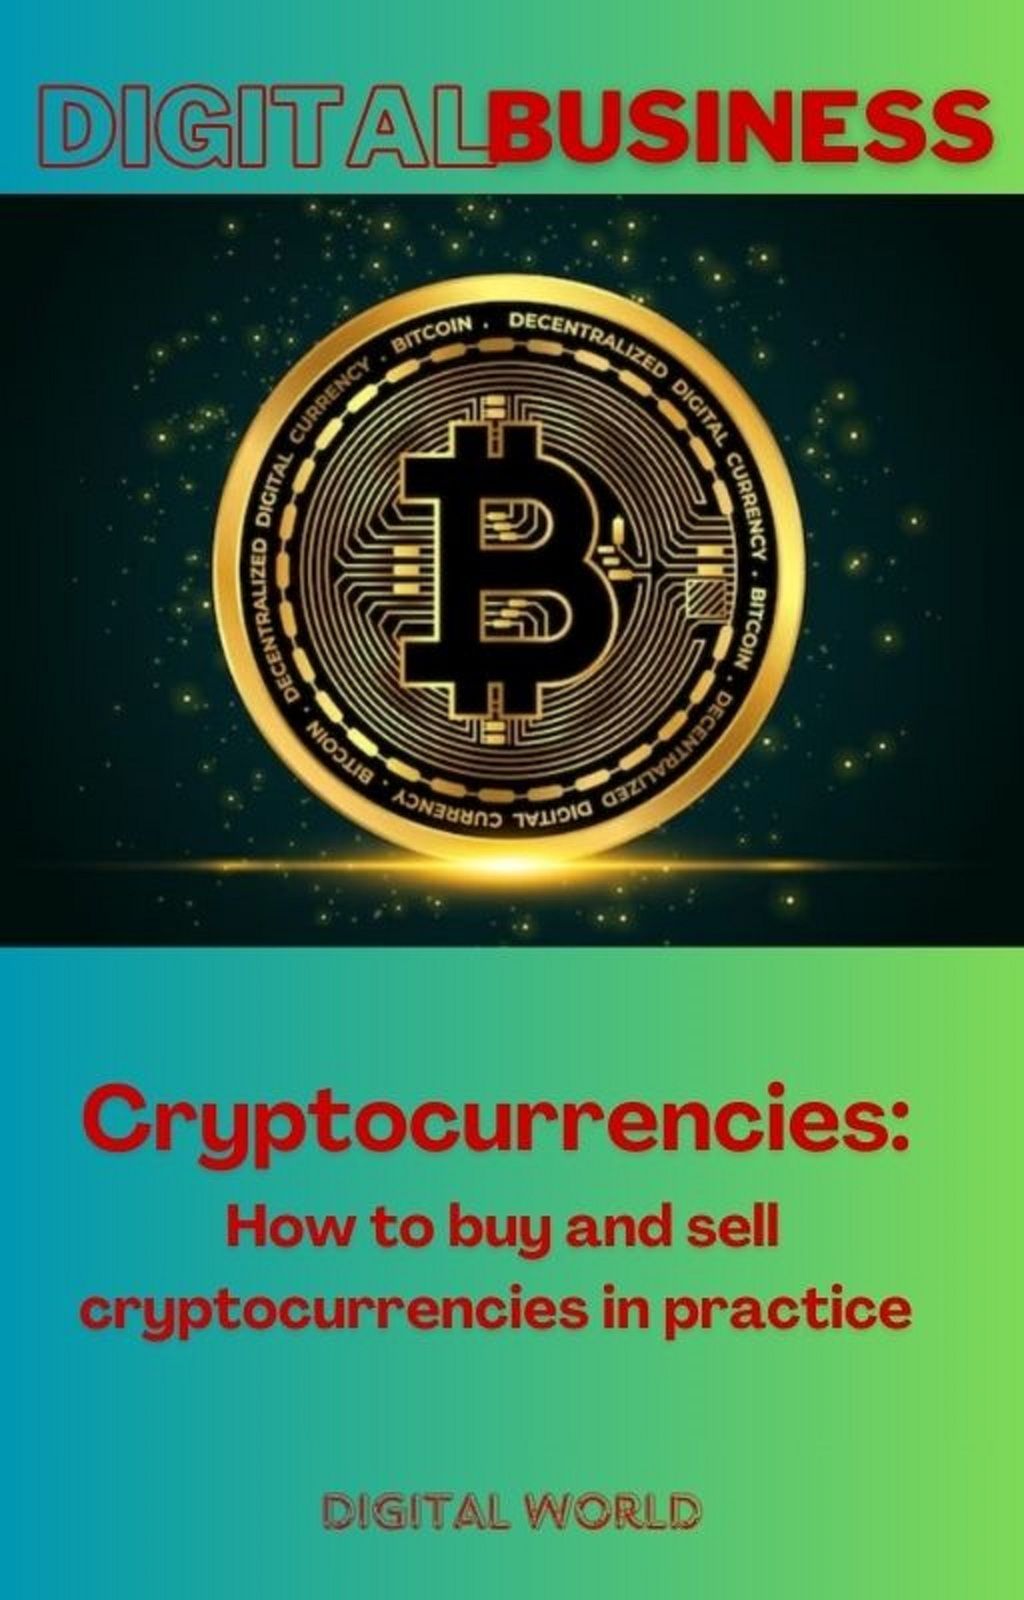 Cryptocurrencies - How to buy and sell cryptocurrencies in practice